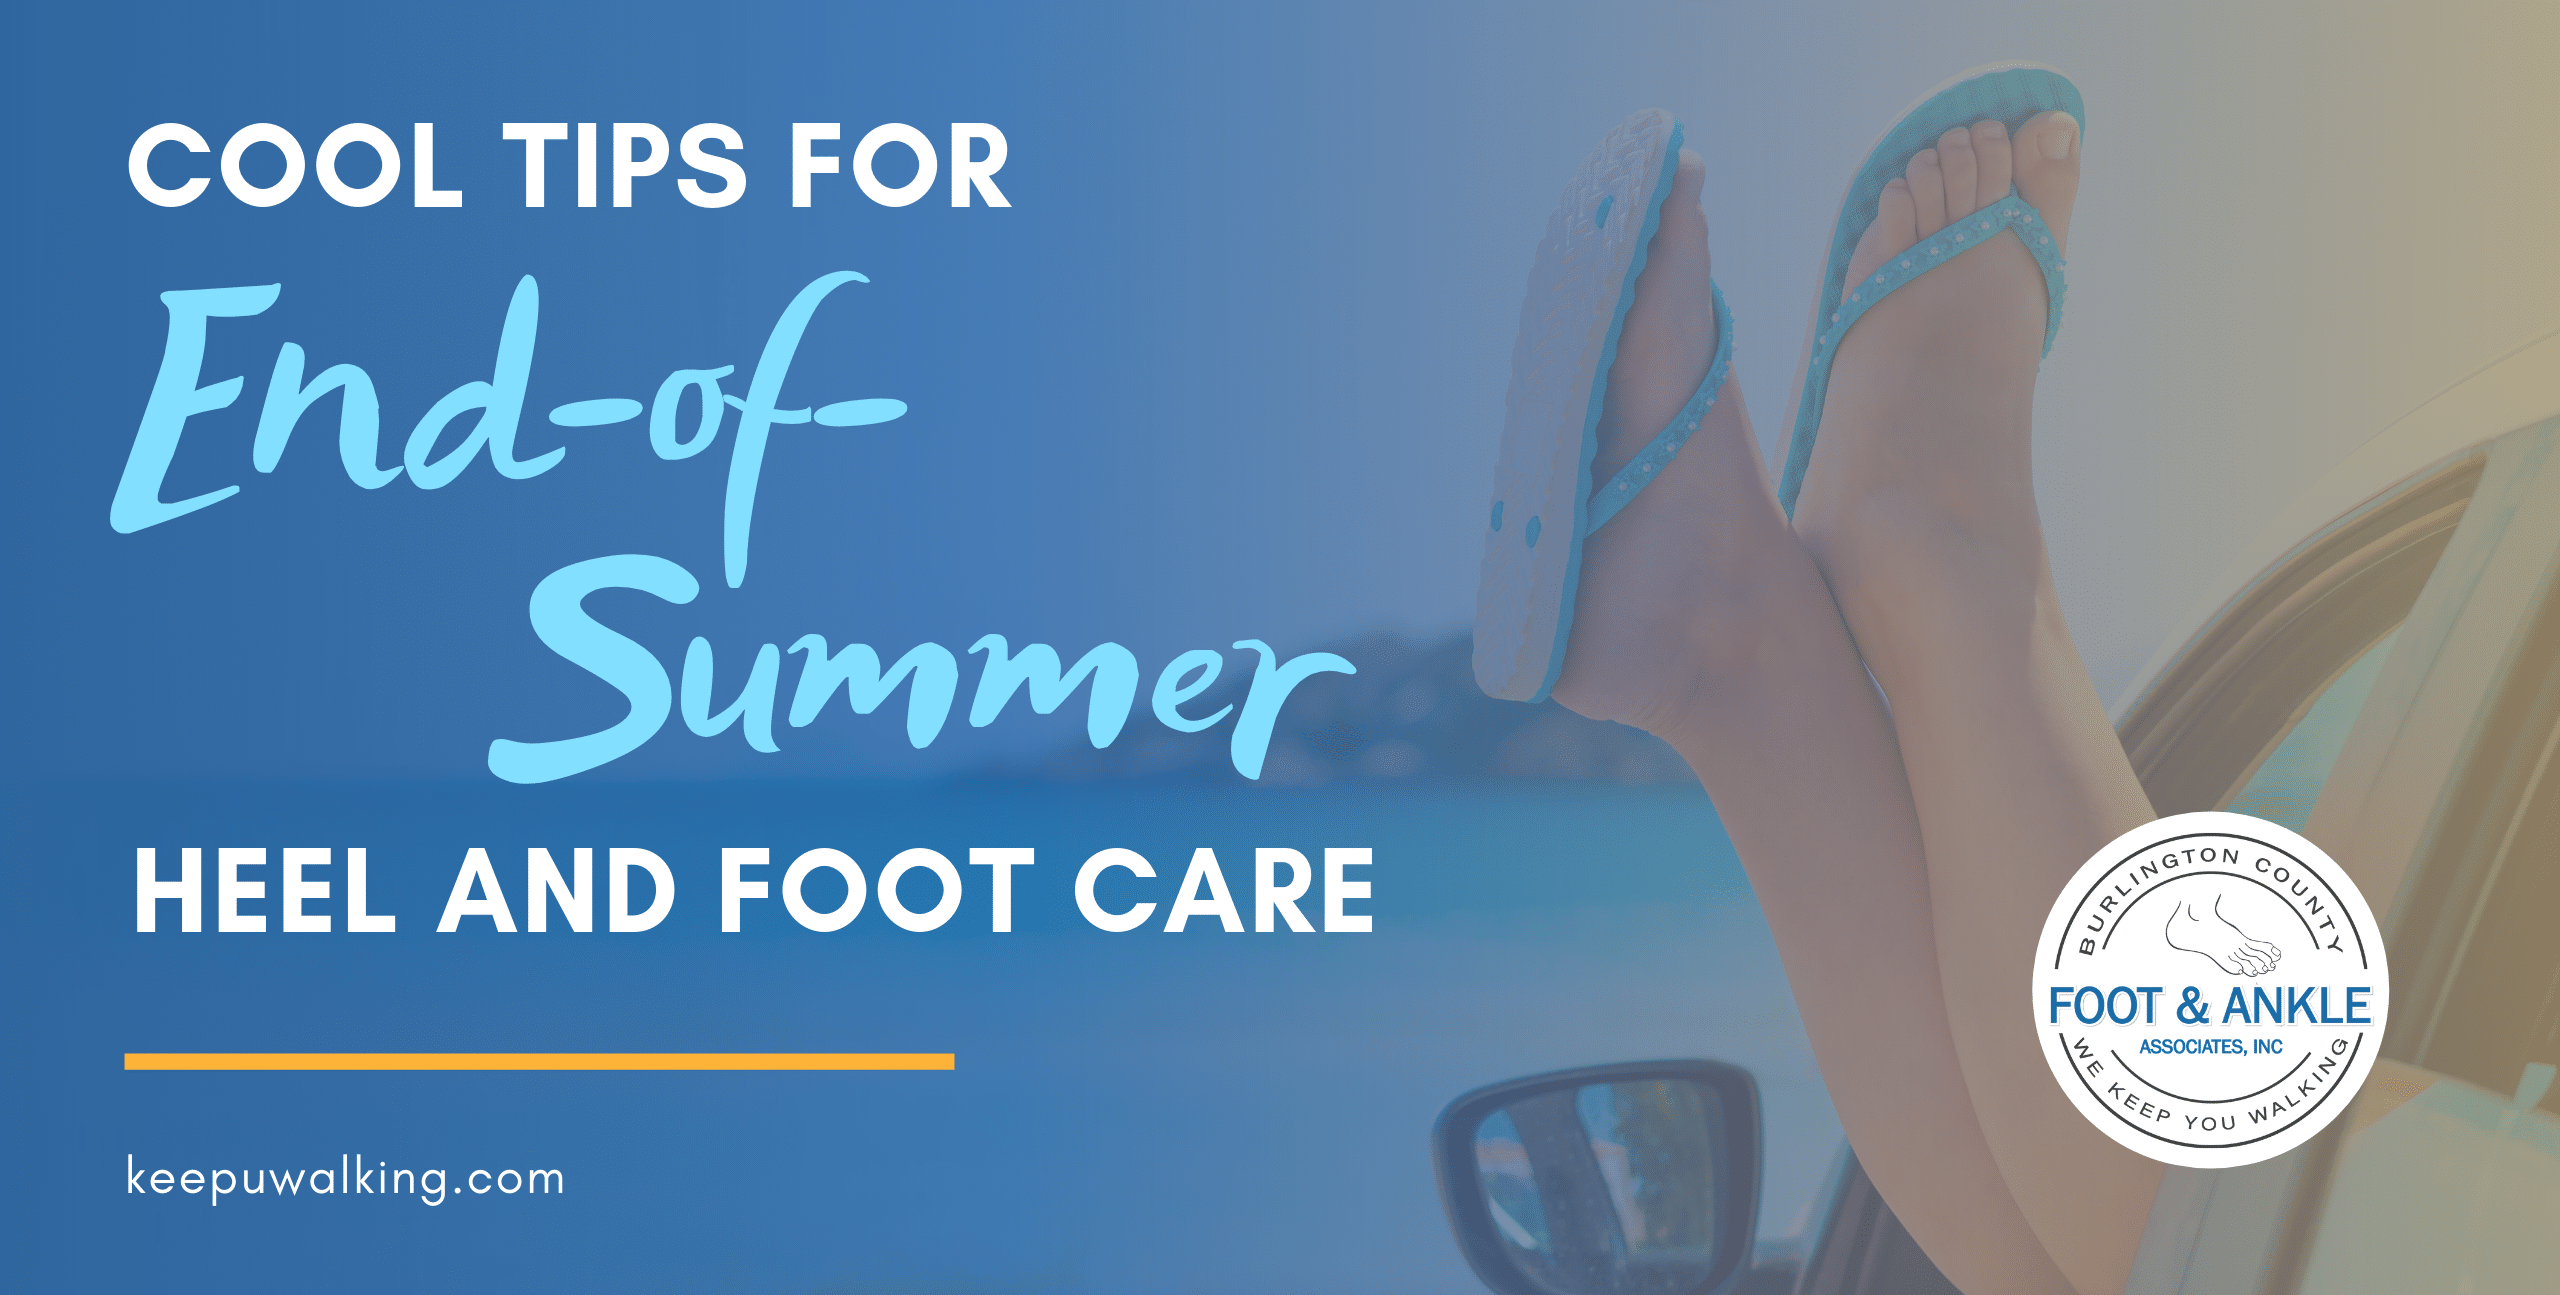 Cool Tips for End-of-Summer Heel and Foot Care